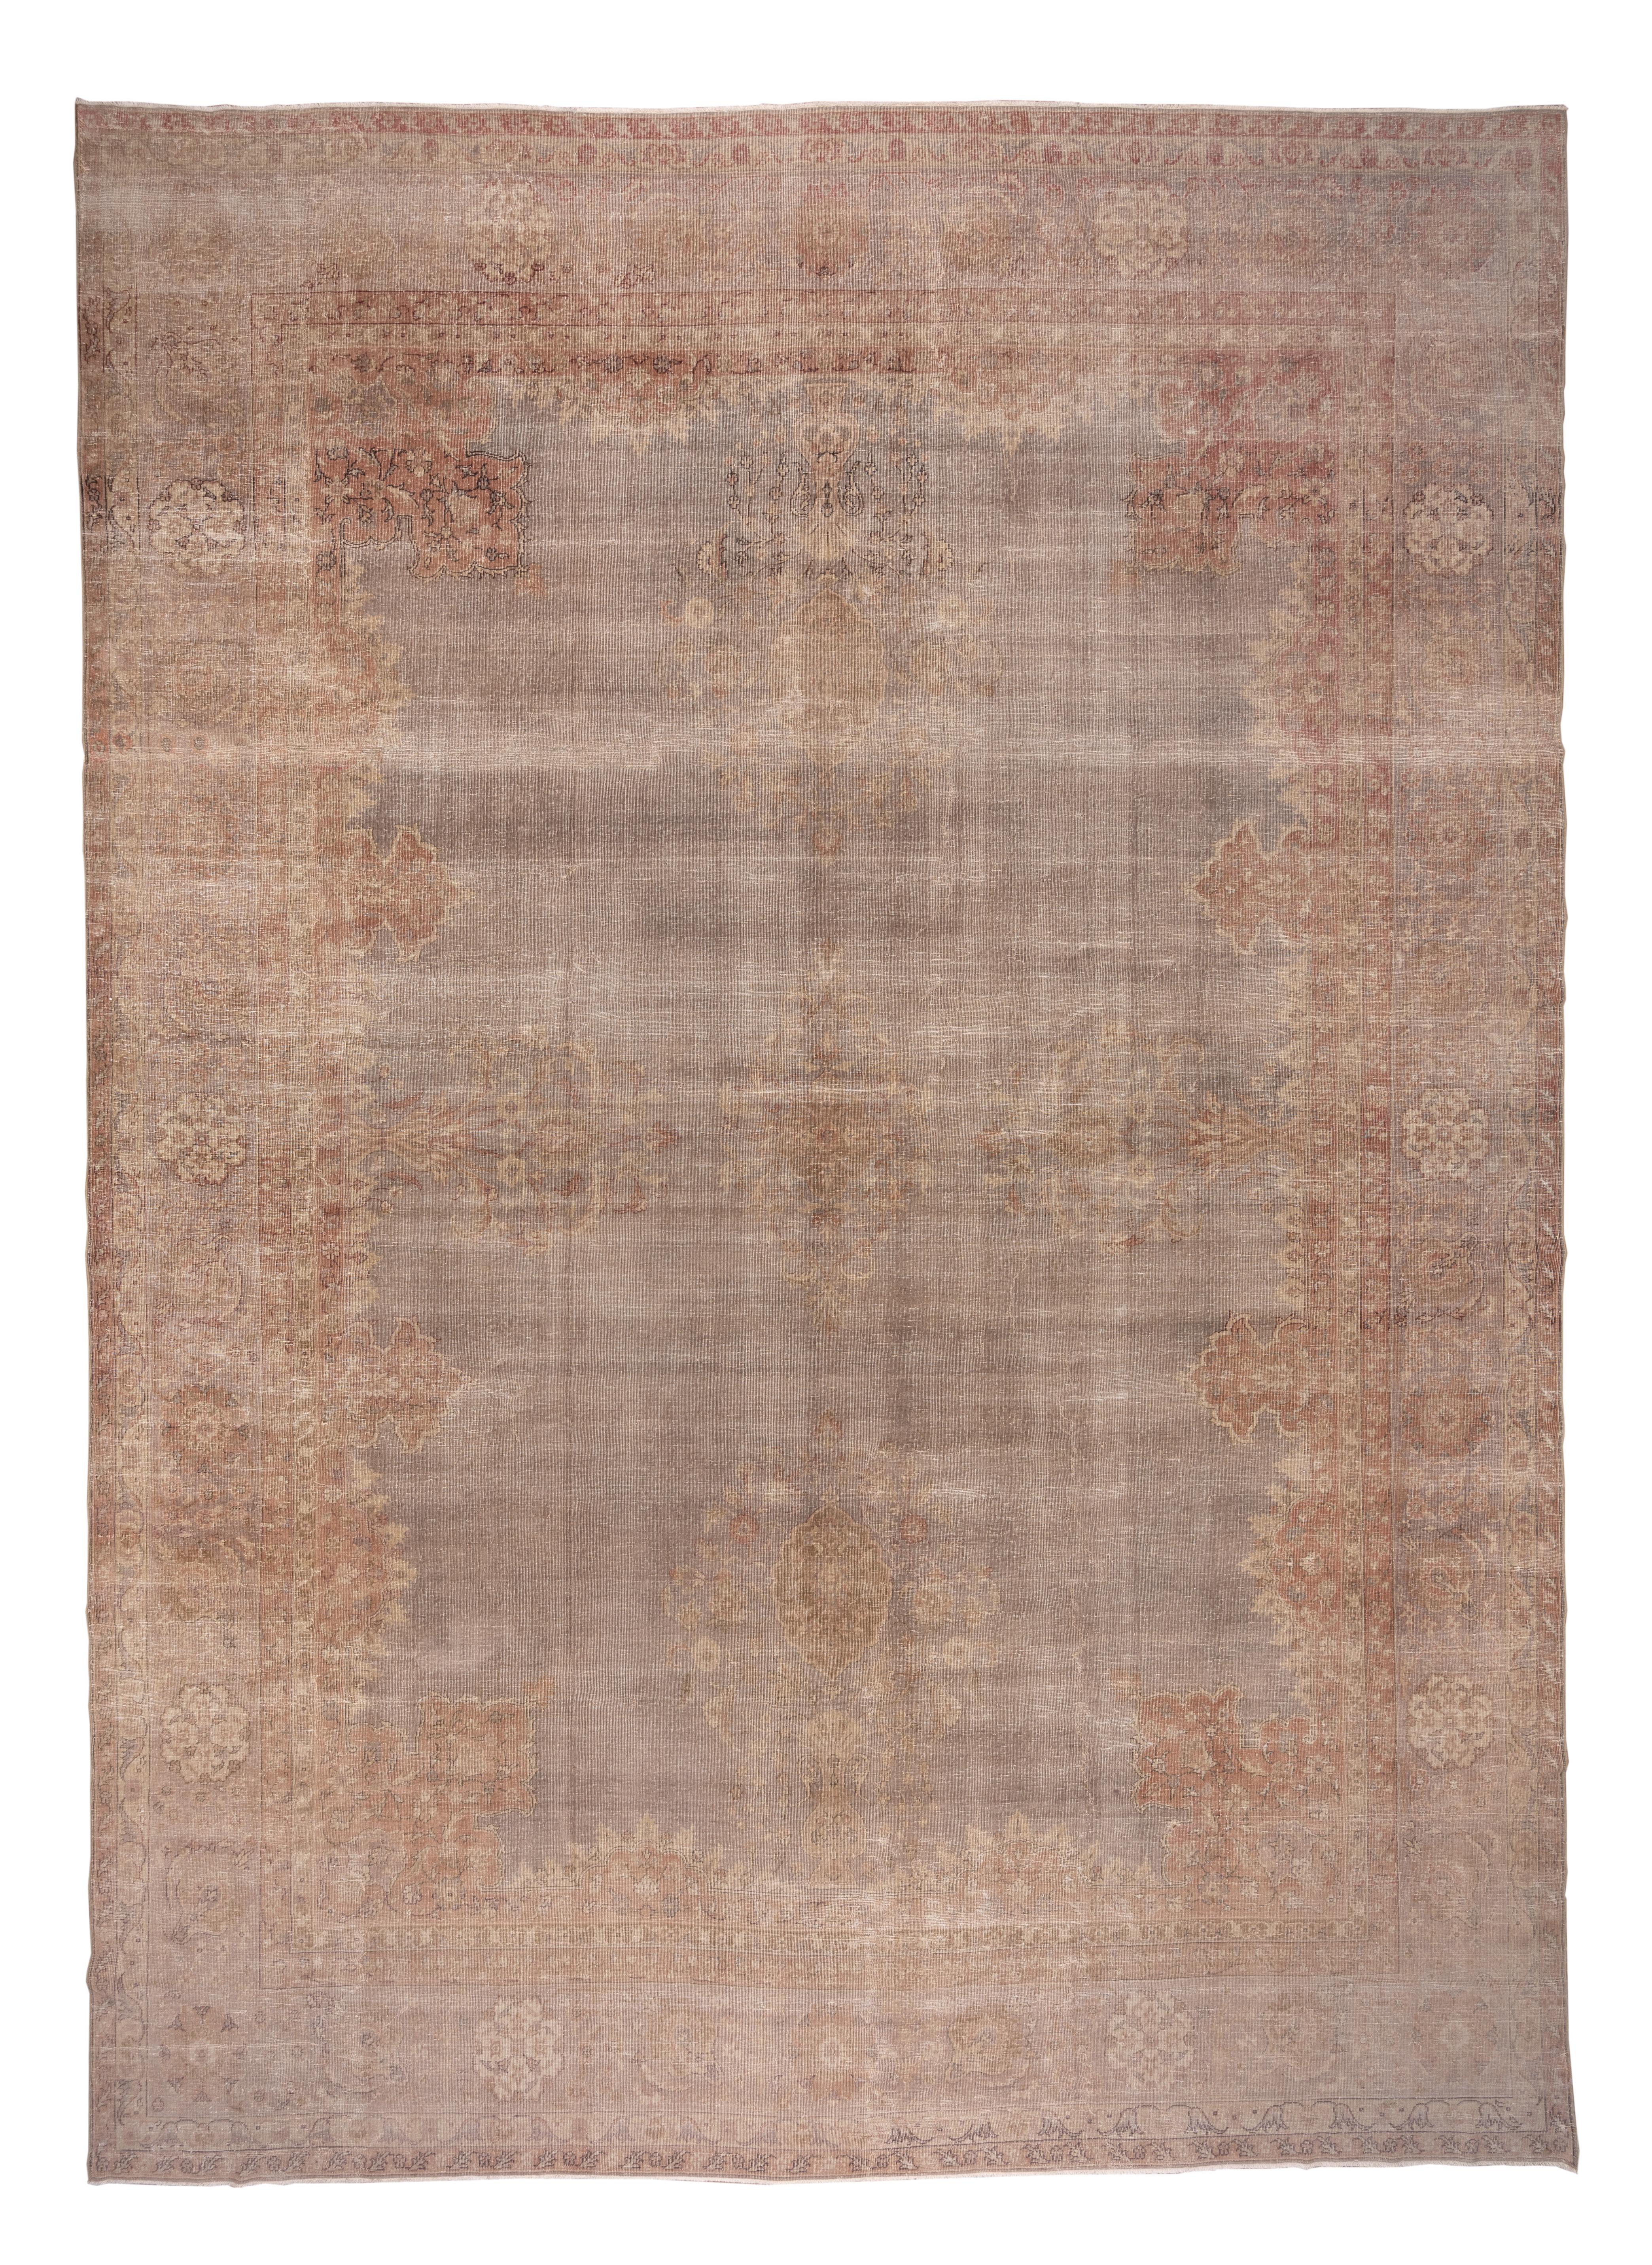 This substantially worn east Anatolian carpet presents vases at the cardinal points of the field. Tone-on-tone effect continues to the tan border with eggshell octofoils. There are a few accents in dark brown.